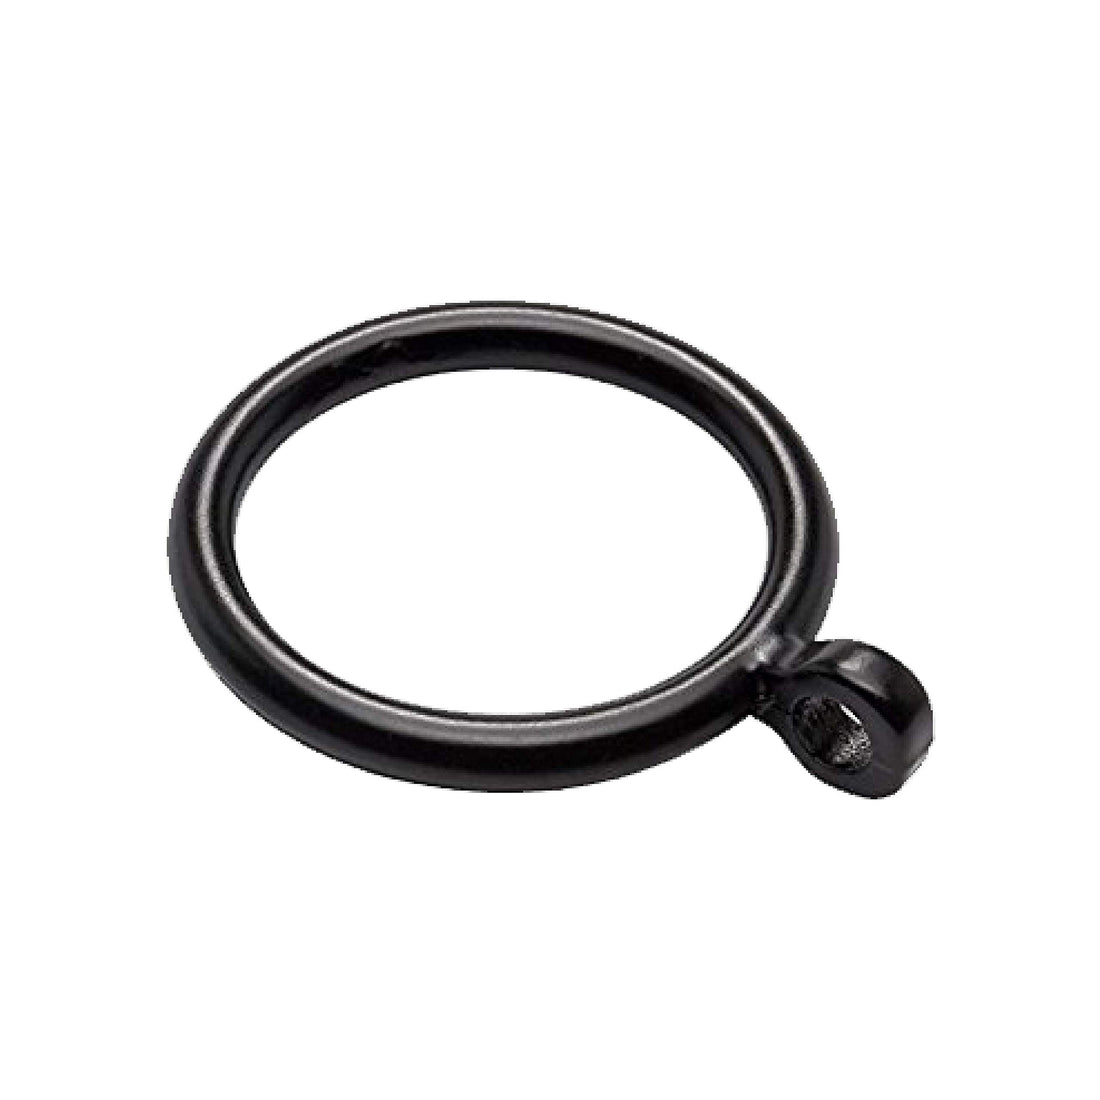 Jasmine Waldorf Black Curtain Pole Rings - PVC Ring - Easy to Clean - Easy to Install – Premium Quality - Smooth Gliding – Pack of 6